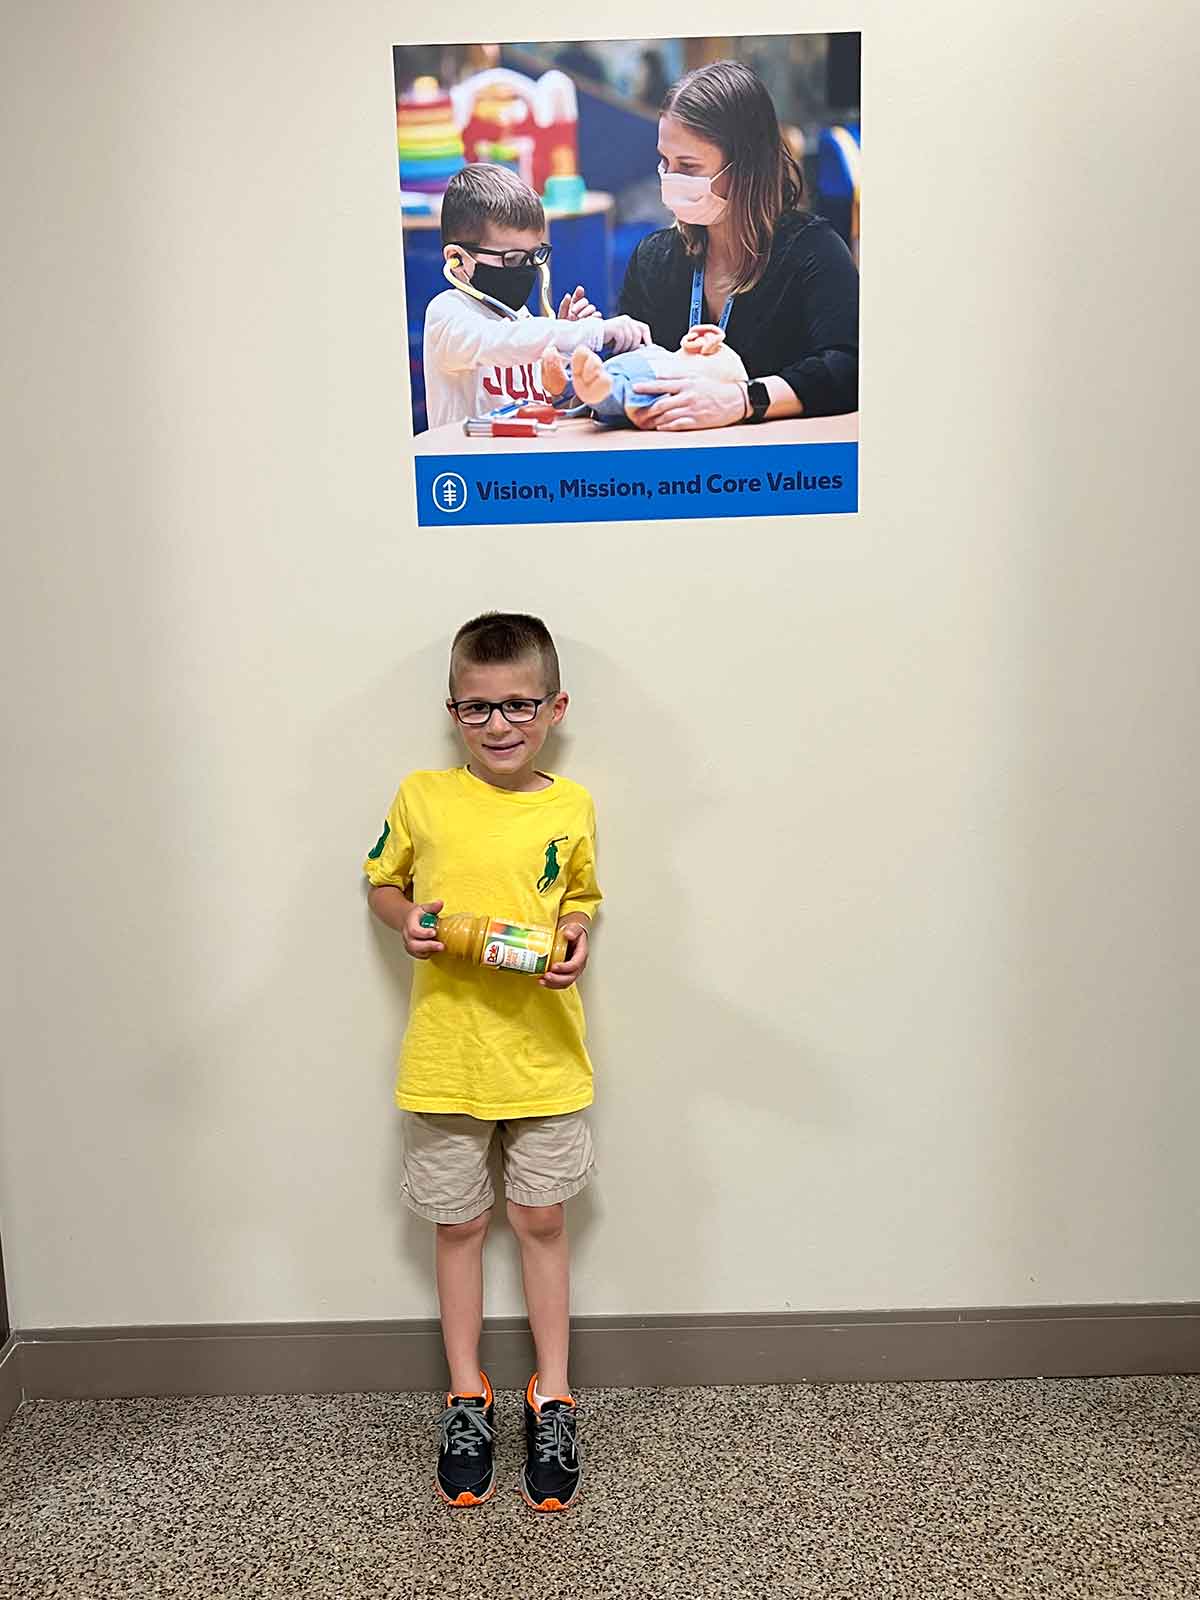 Boy standing in a hallway underneath a photo of a boy using a doctor's kit on a stuffed animal.